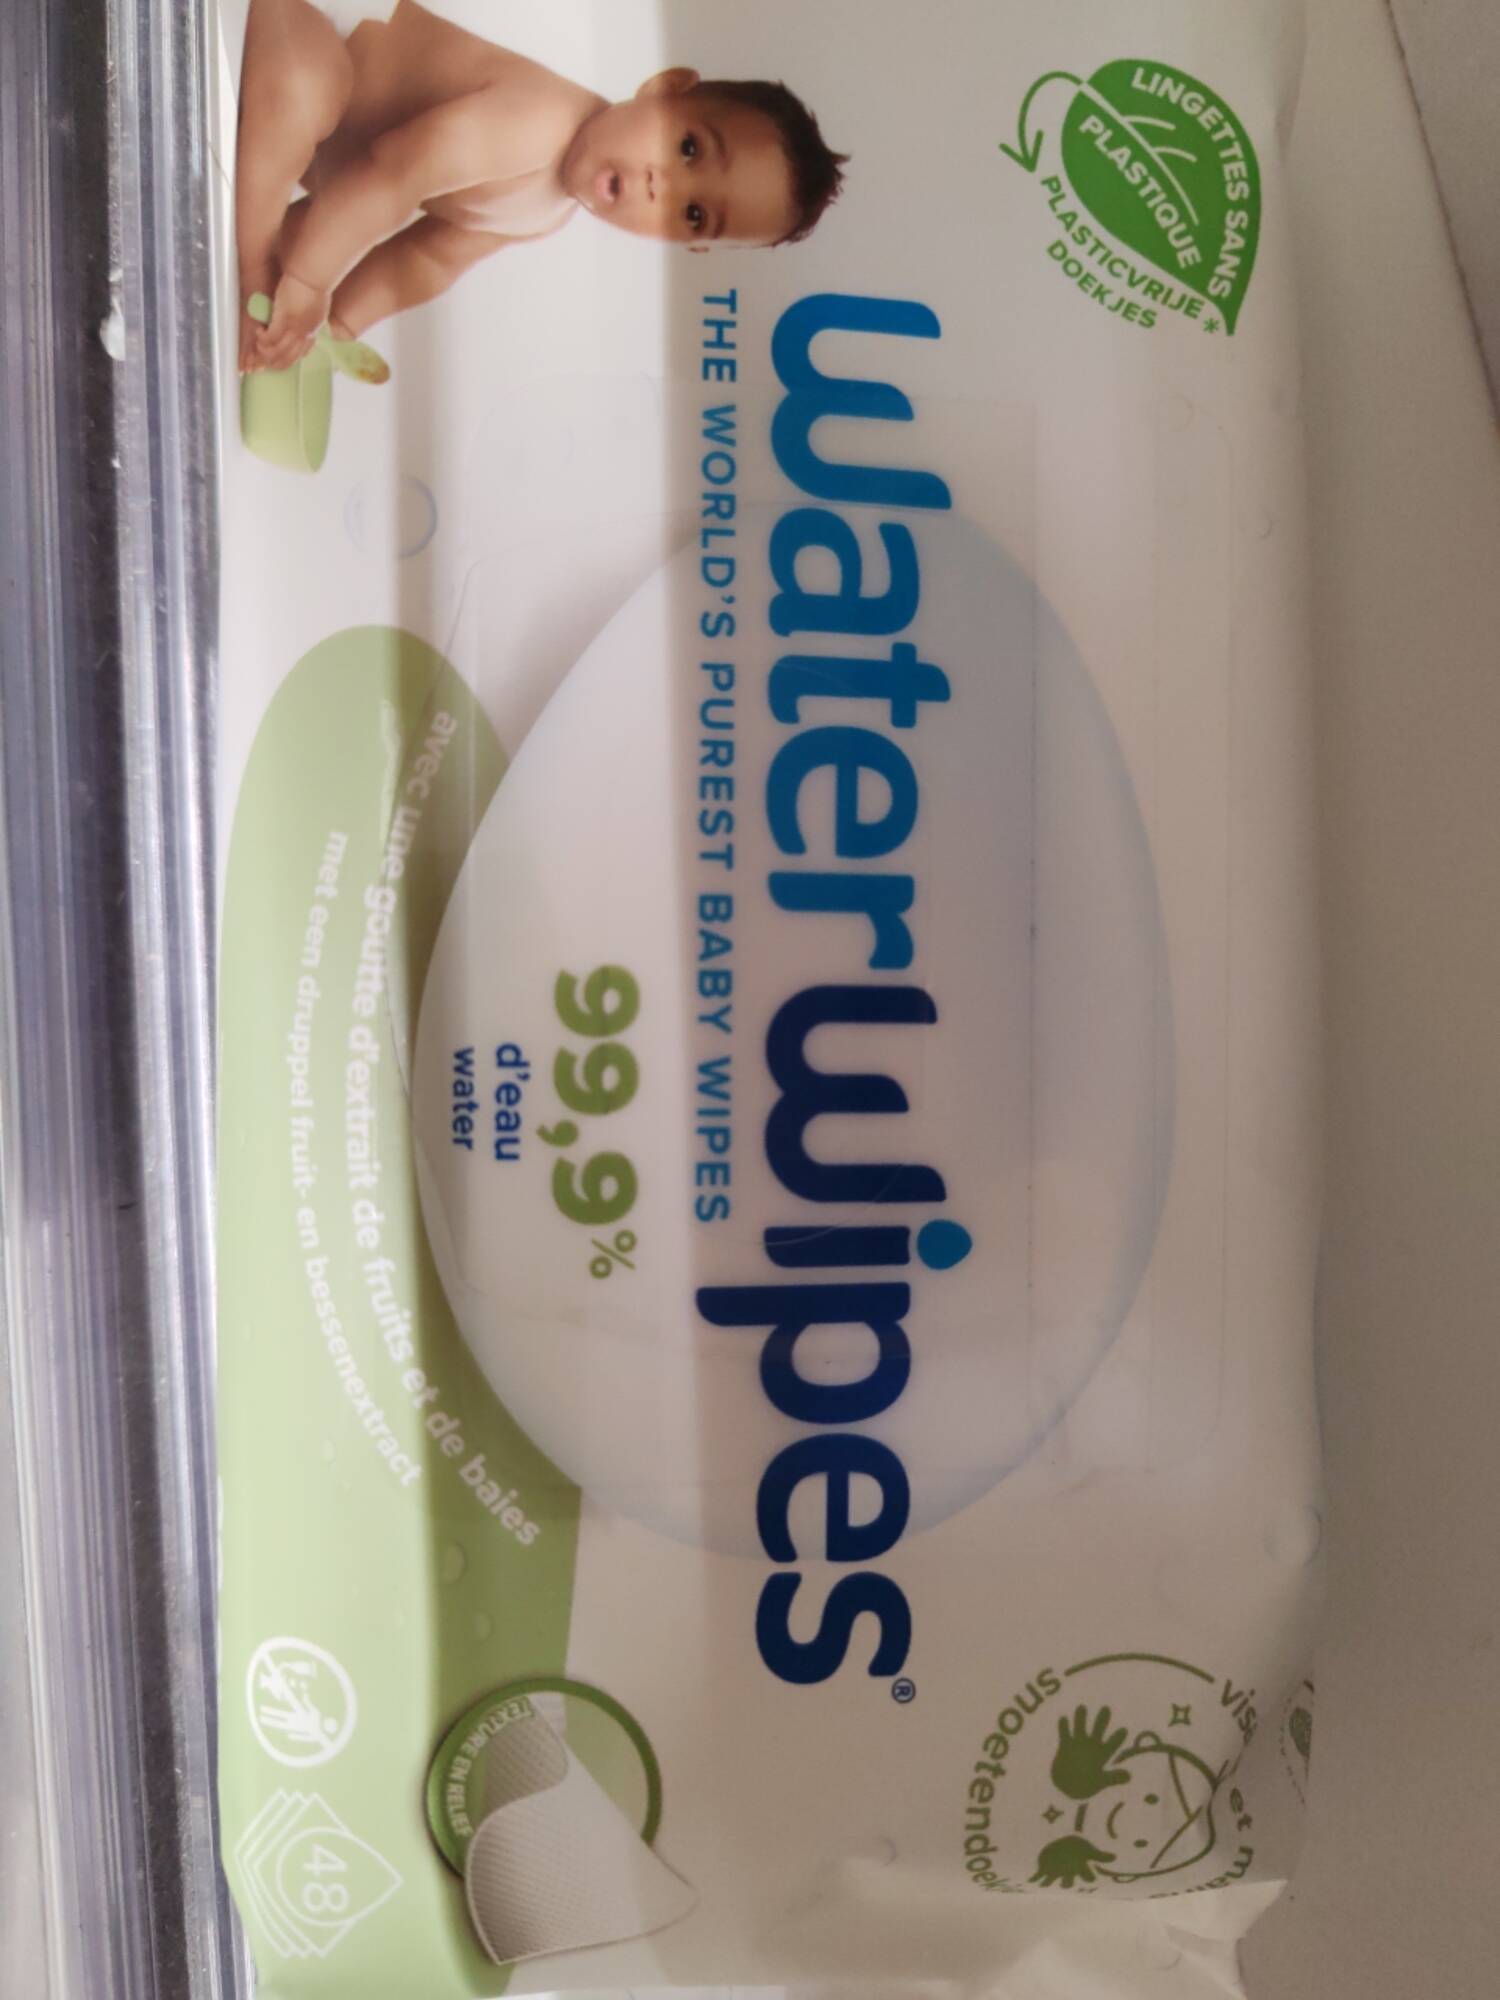 WATERWIPES - The world's purest baby wipes